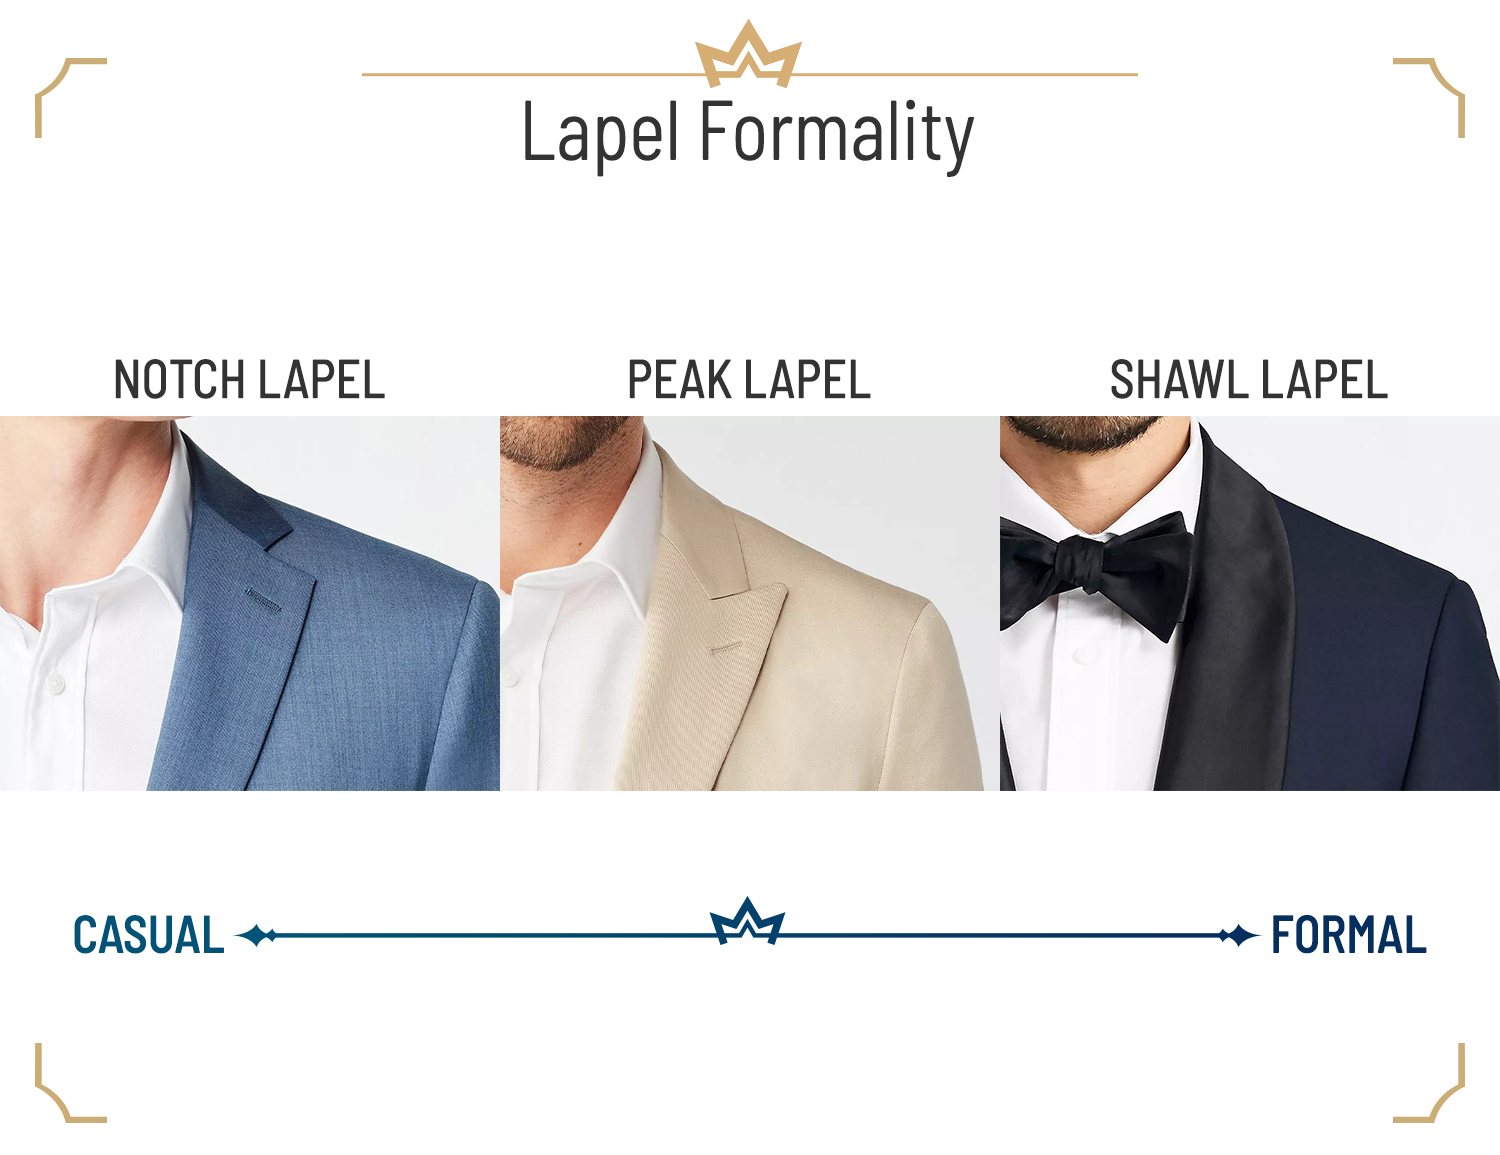 The formality of different suit jacket lapels